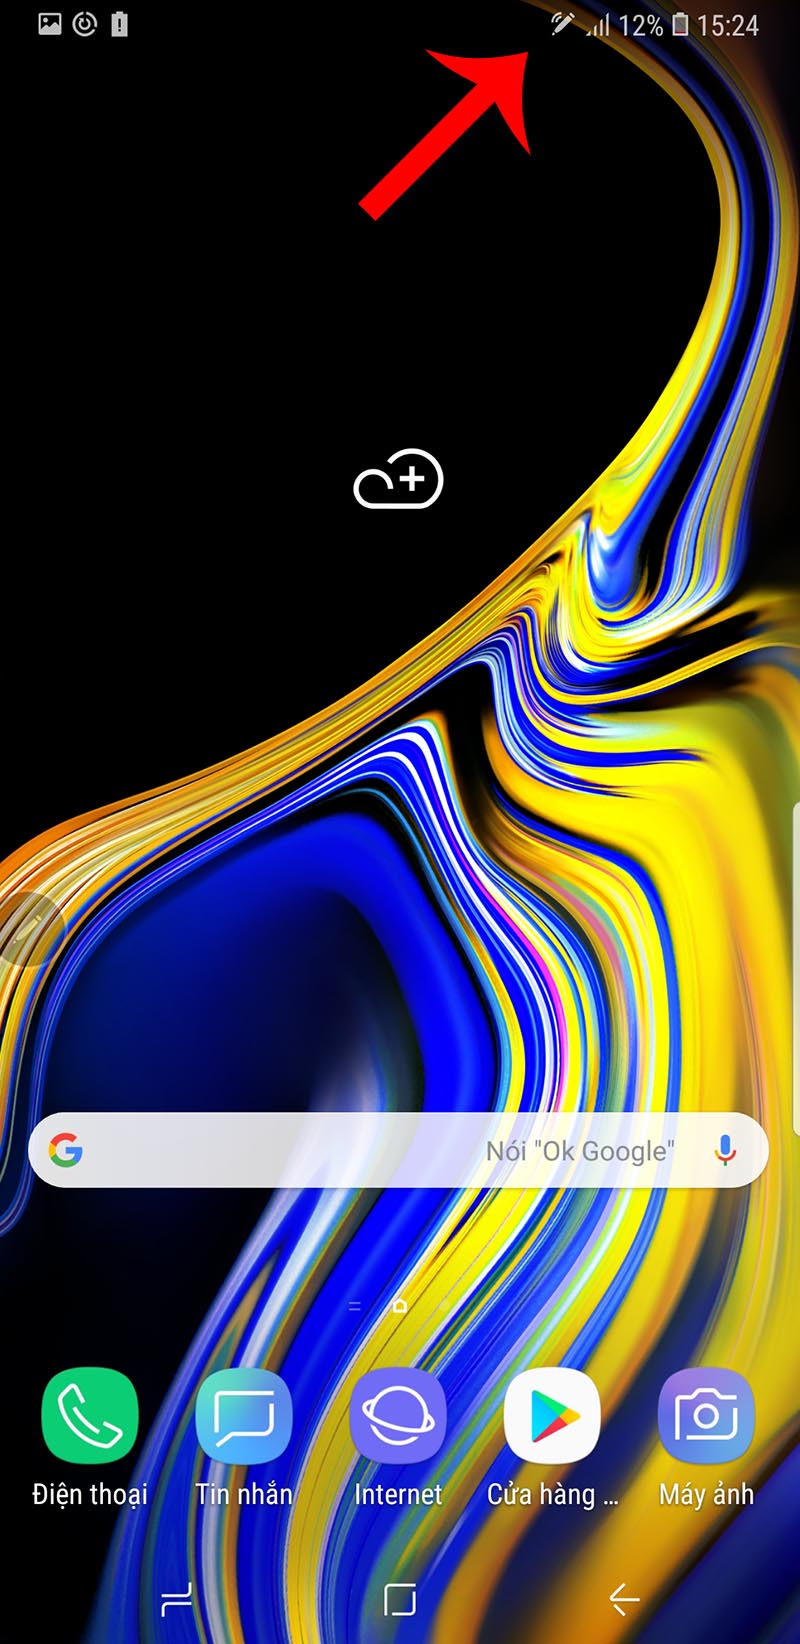 1080x2280 Samung Galaxy Note 9 Original One Plus 6,Huawei p20,Honor view  10,Vivo y85,Oppo f7,Xiaomi Mi A2 ,HD 4k  Wallpapers,Images,Backgrounds,Photos and Pictures